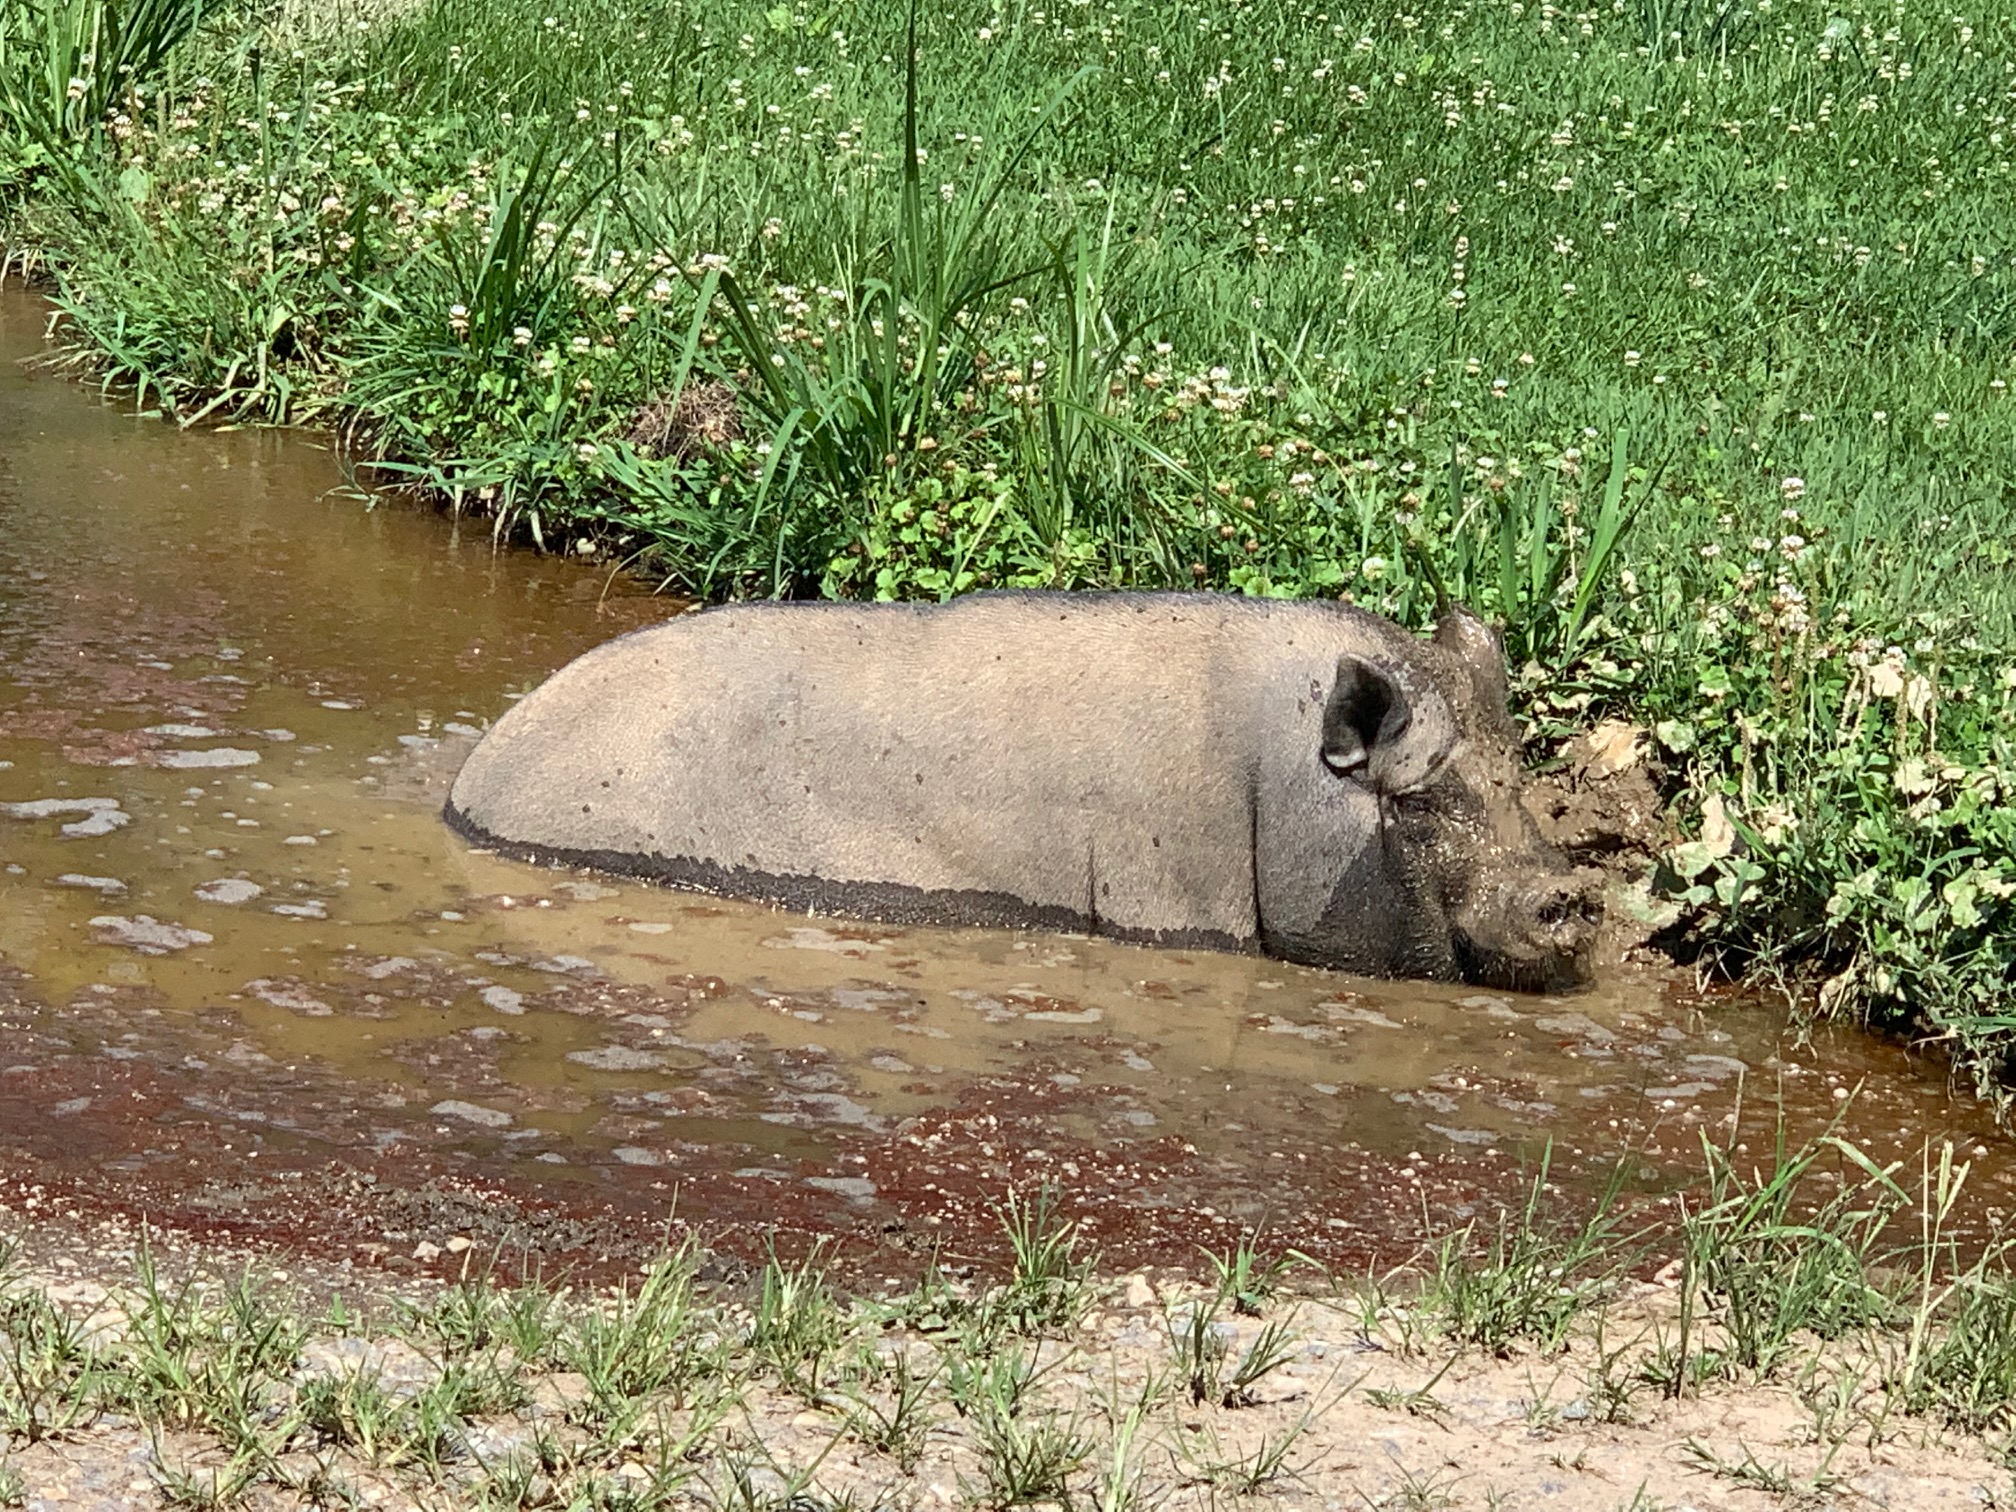 Petunia cooling off on a summer's day.